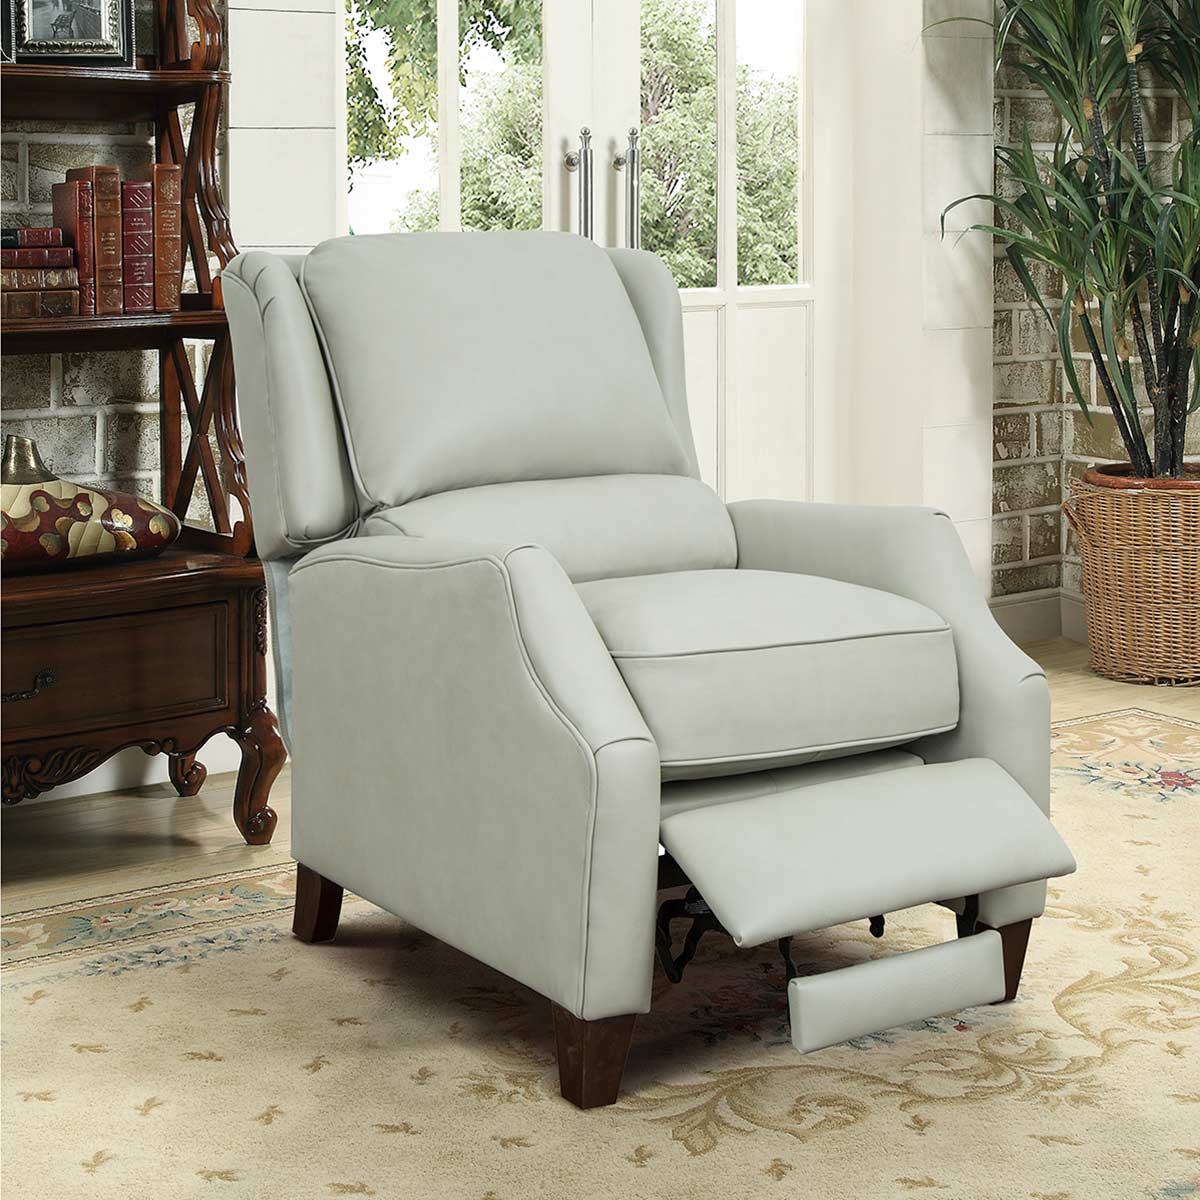 Barcalounger Berkeley Recliner Chair - Wenlock Dove/all leather